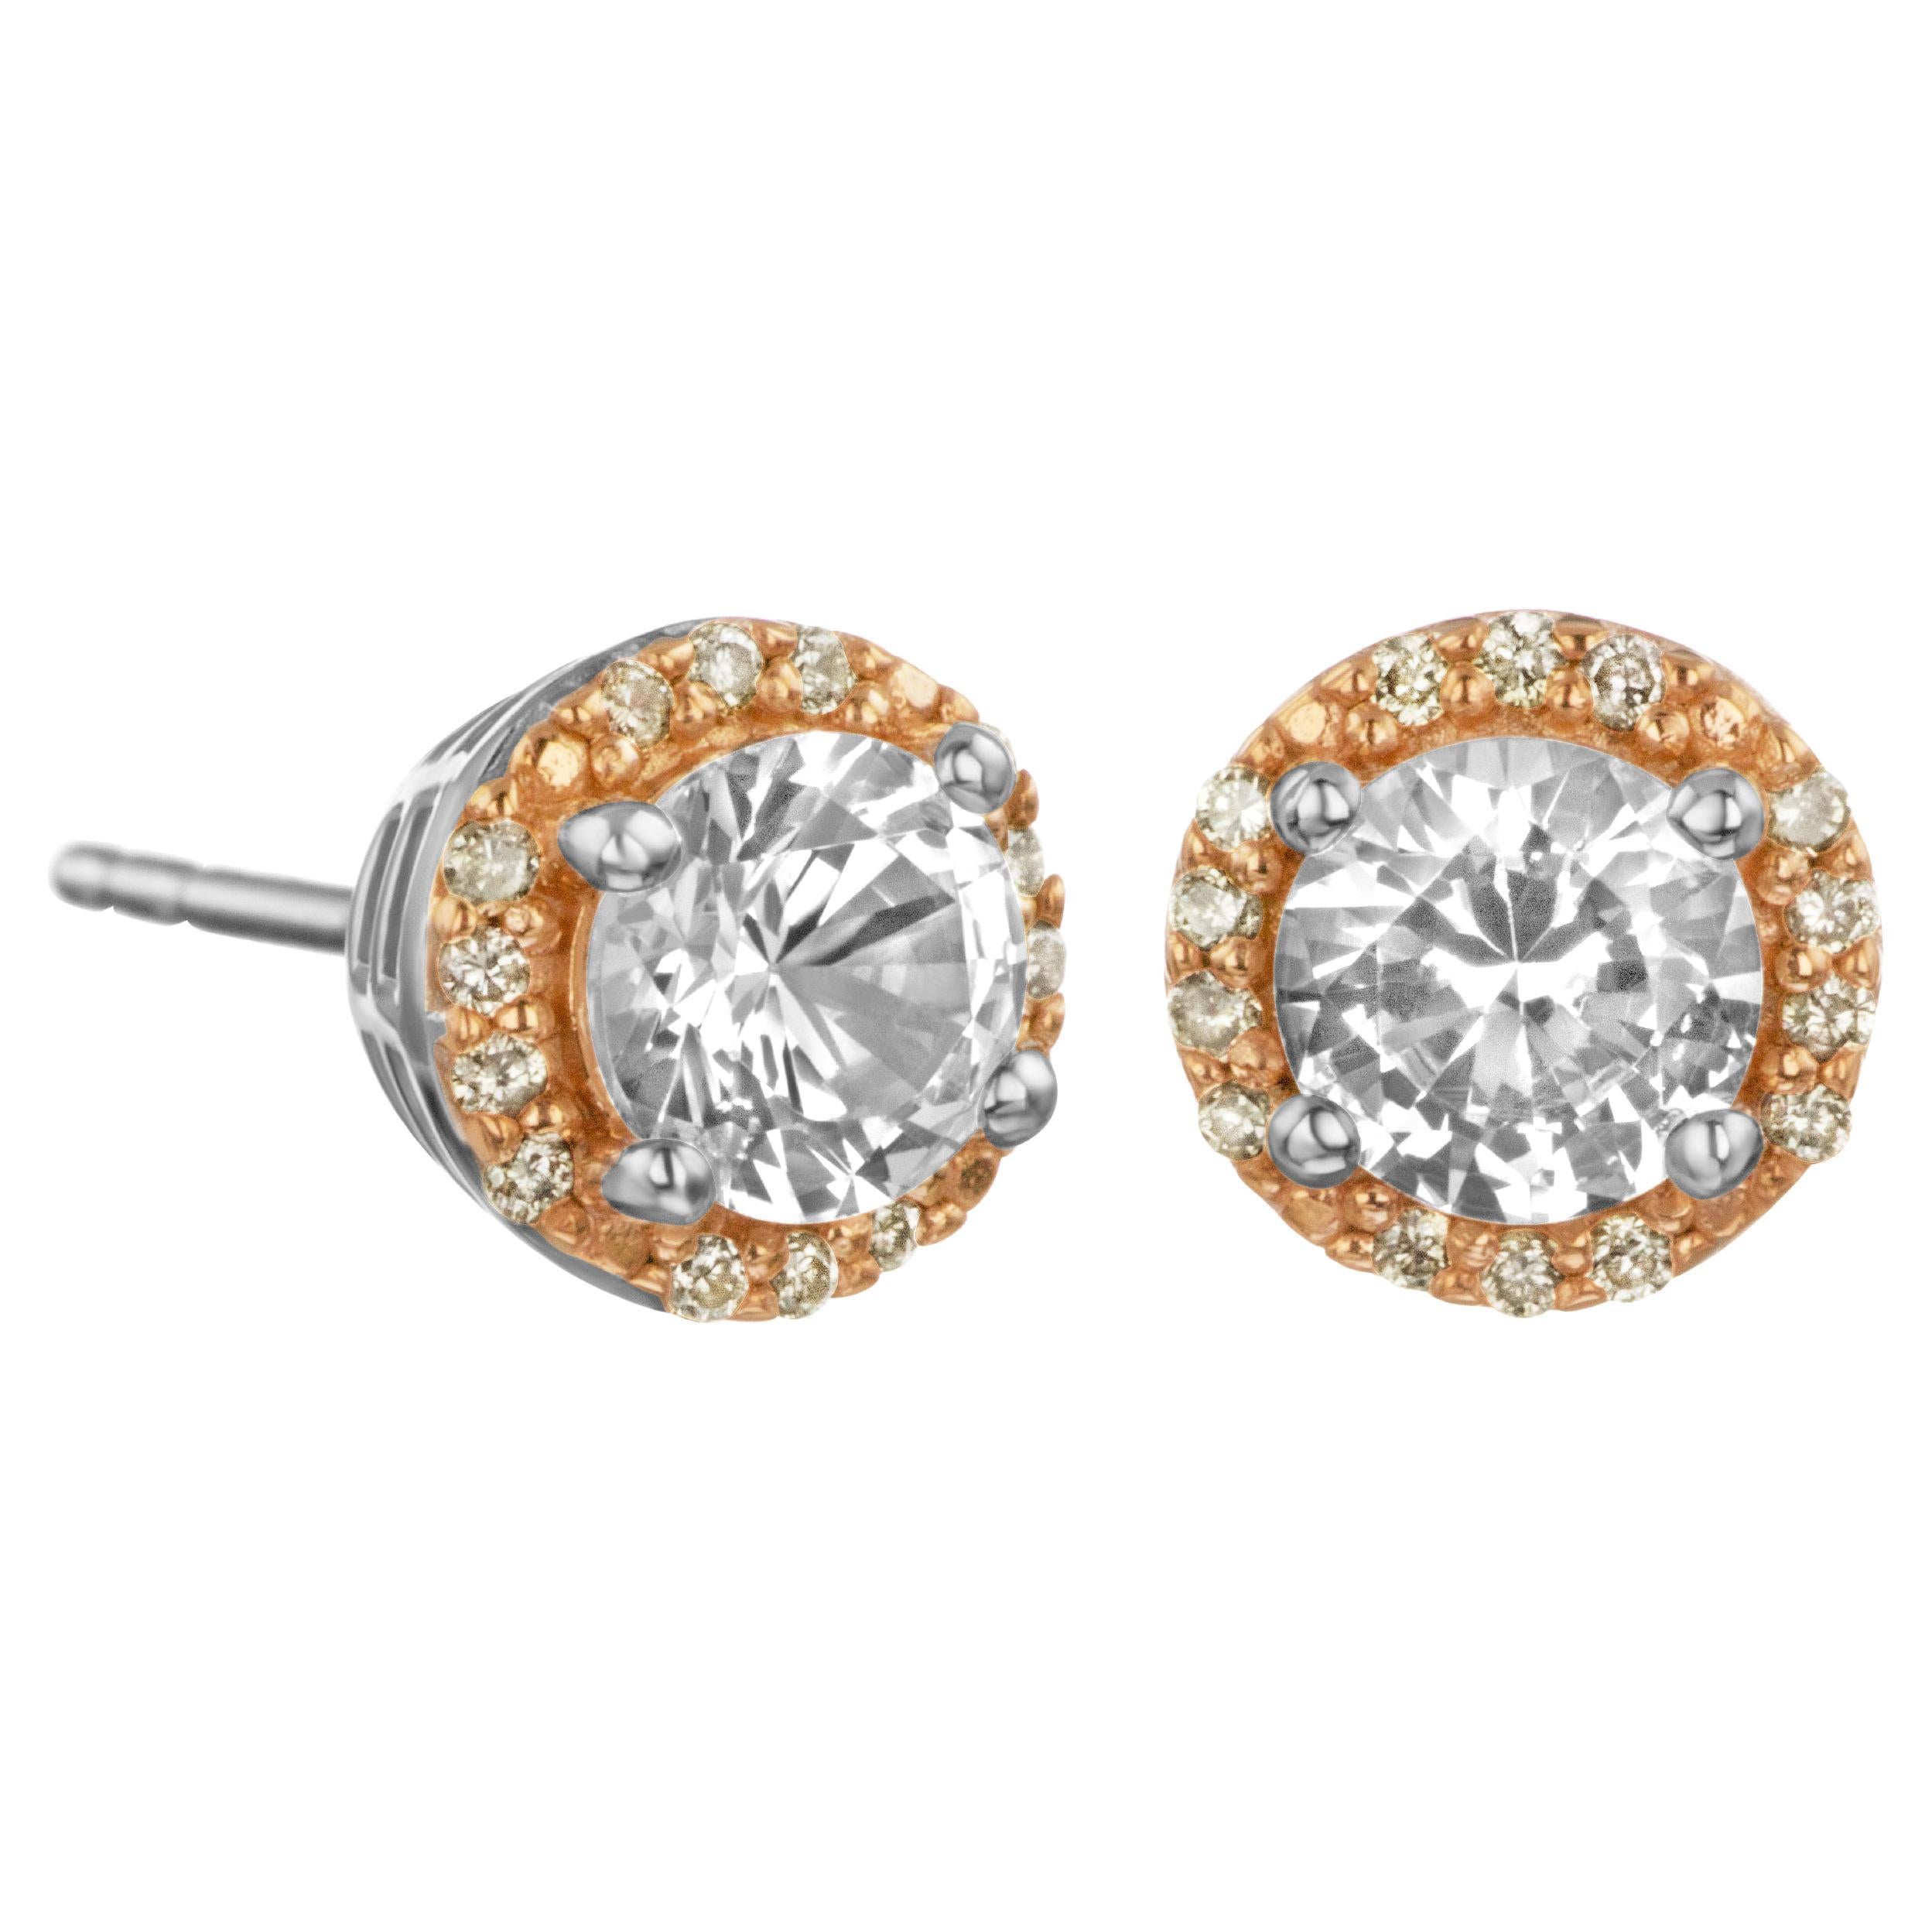 1 Carat Sized White Sapphire and Brown Diamond Halo Stud Earrings